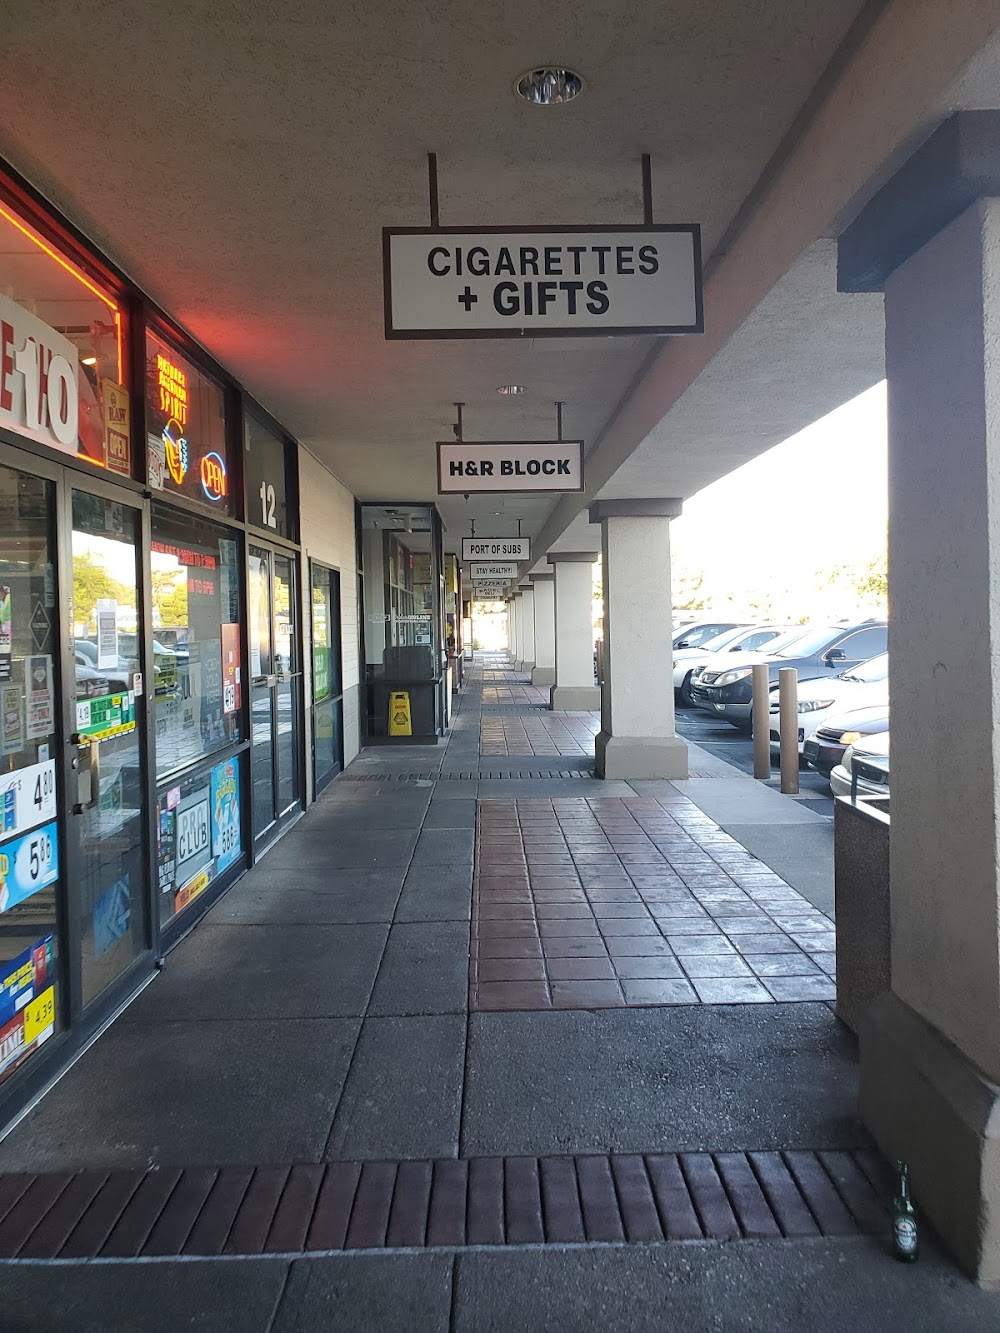 Cigarettes Plus Gifts